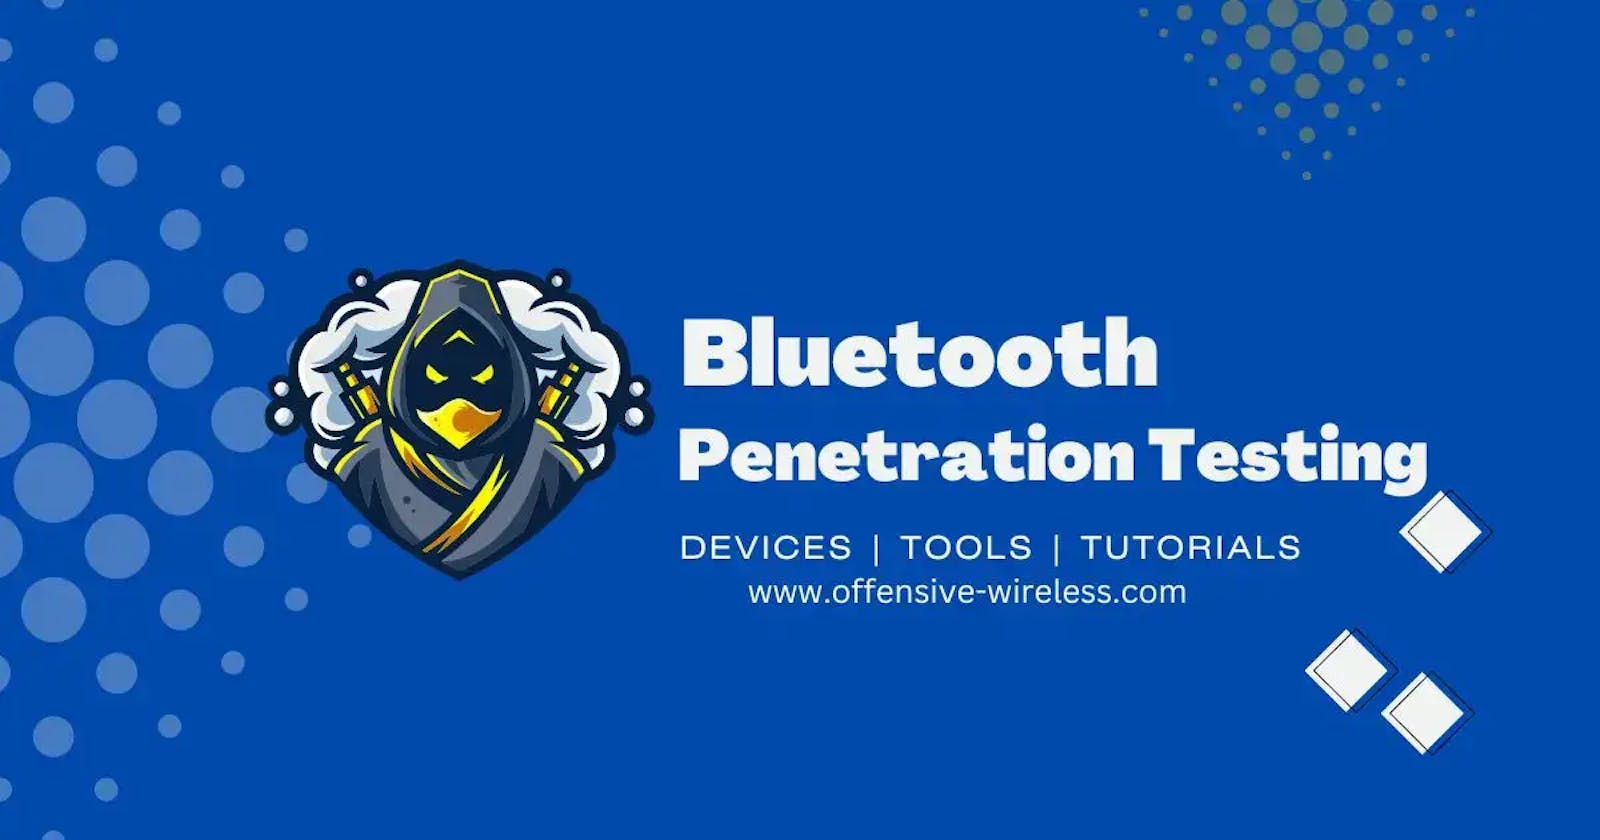 How to hack Bluetooth speakers?